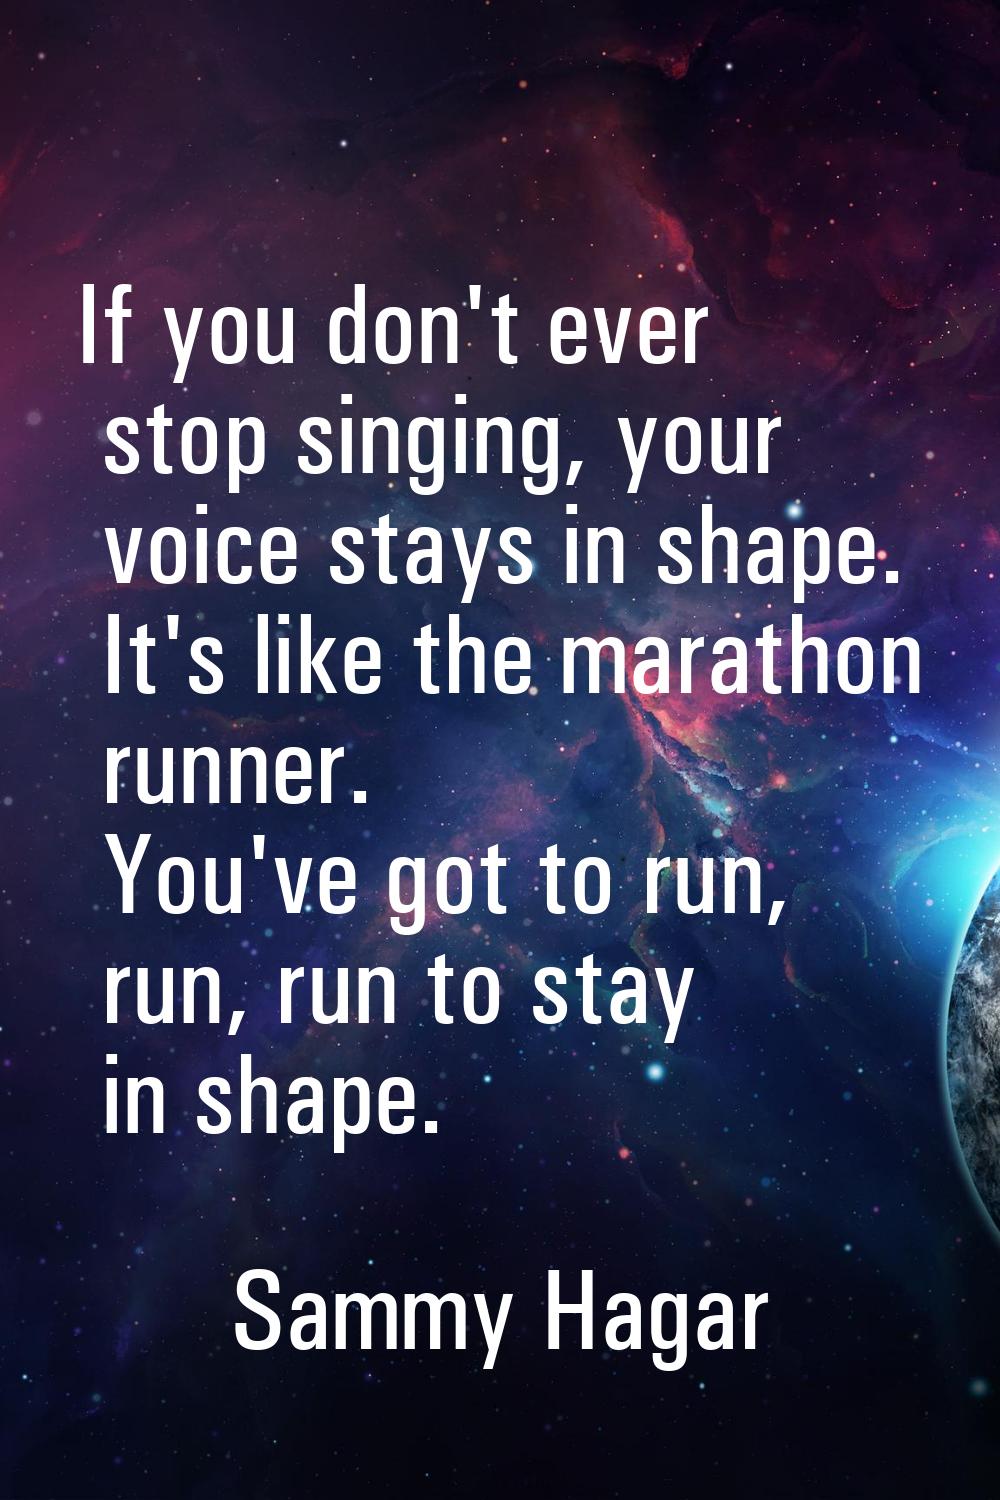 If you don't ever stop singing, your voice stays in shape. It's like the marathon runner. You've go